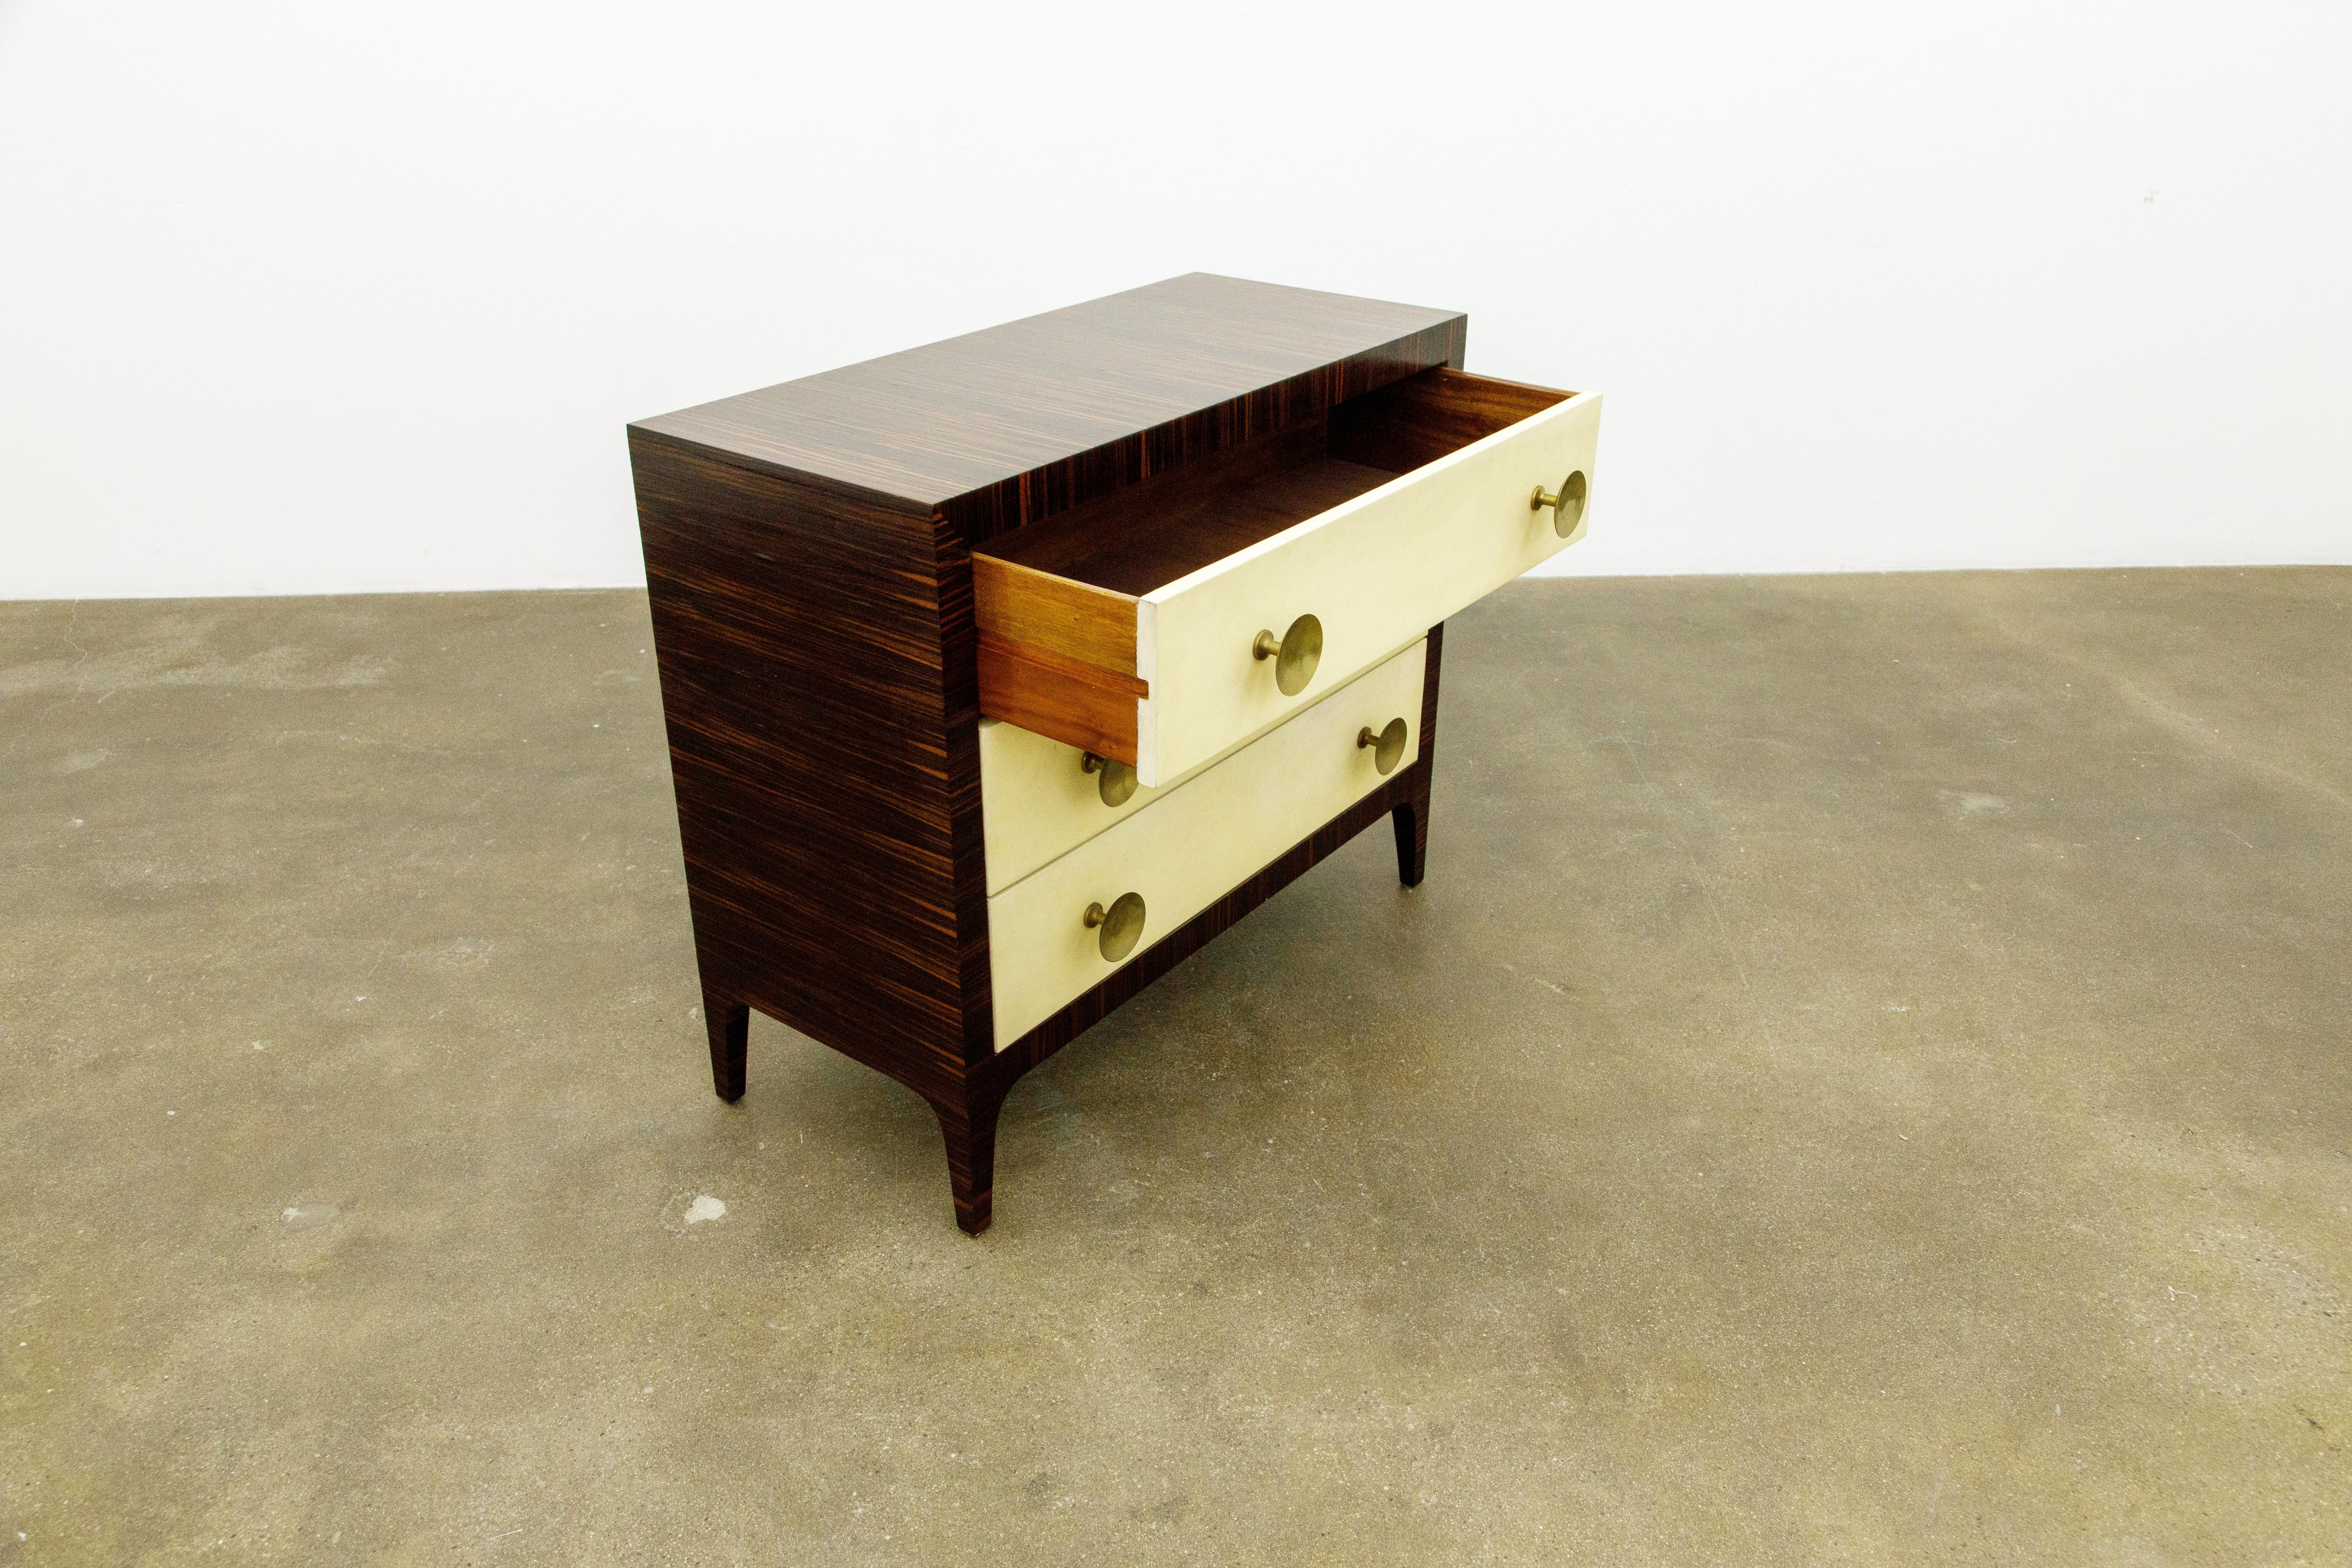 Lacquered Macassar Ebony, Brass and Parchment Deco Styled Chest of Drawers, circa 1970s